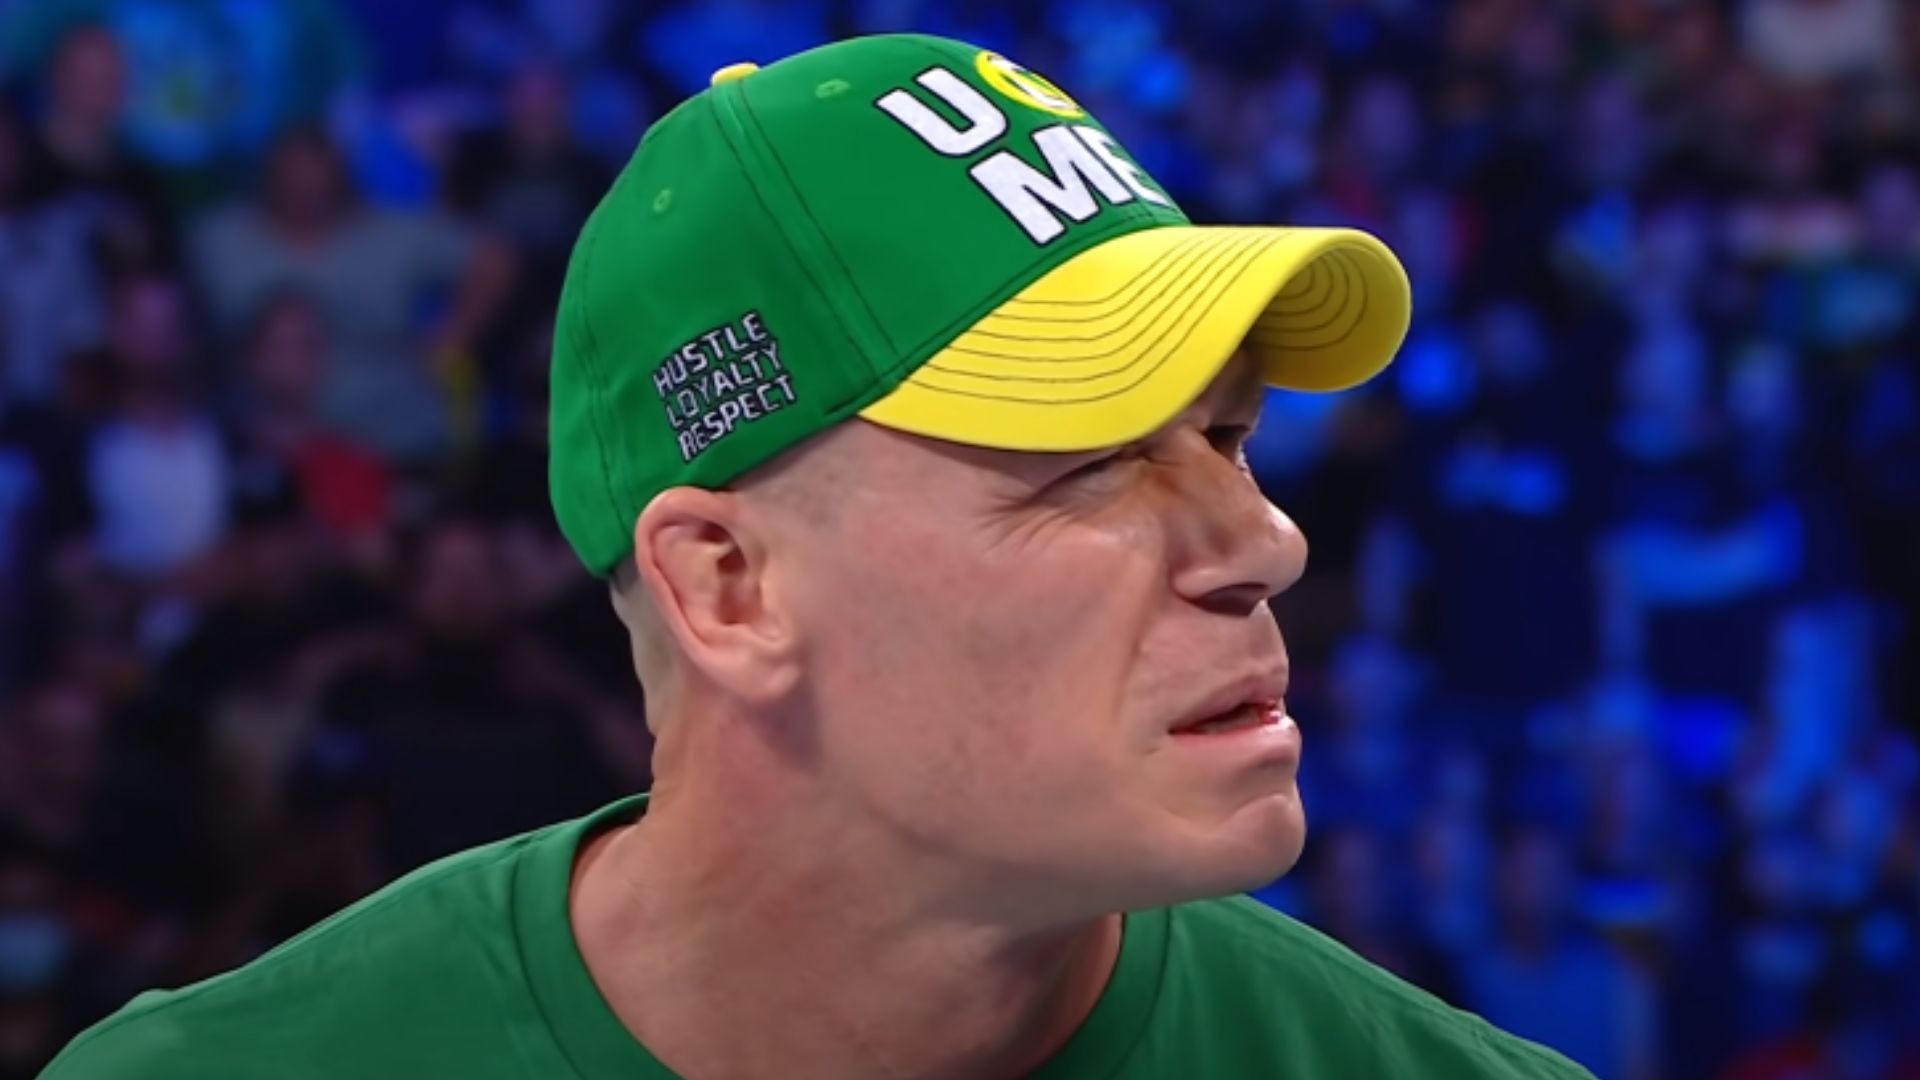 John Cena is not advertised to appear at WrestleMania 38